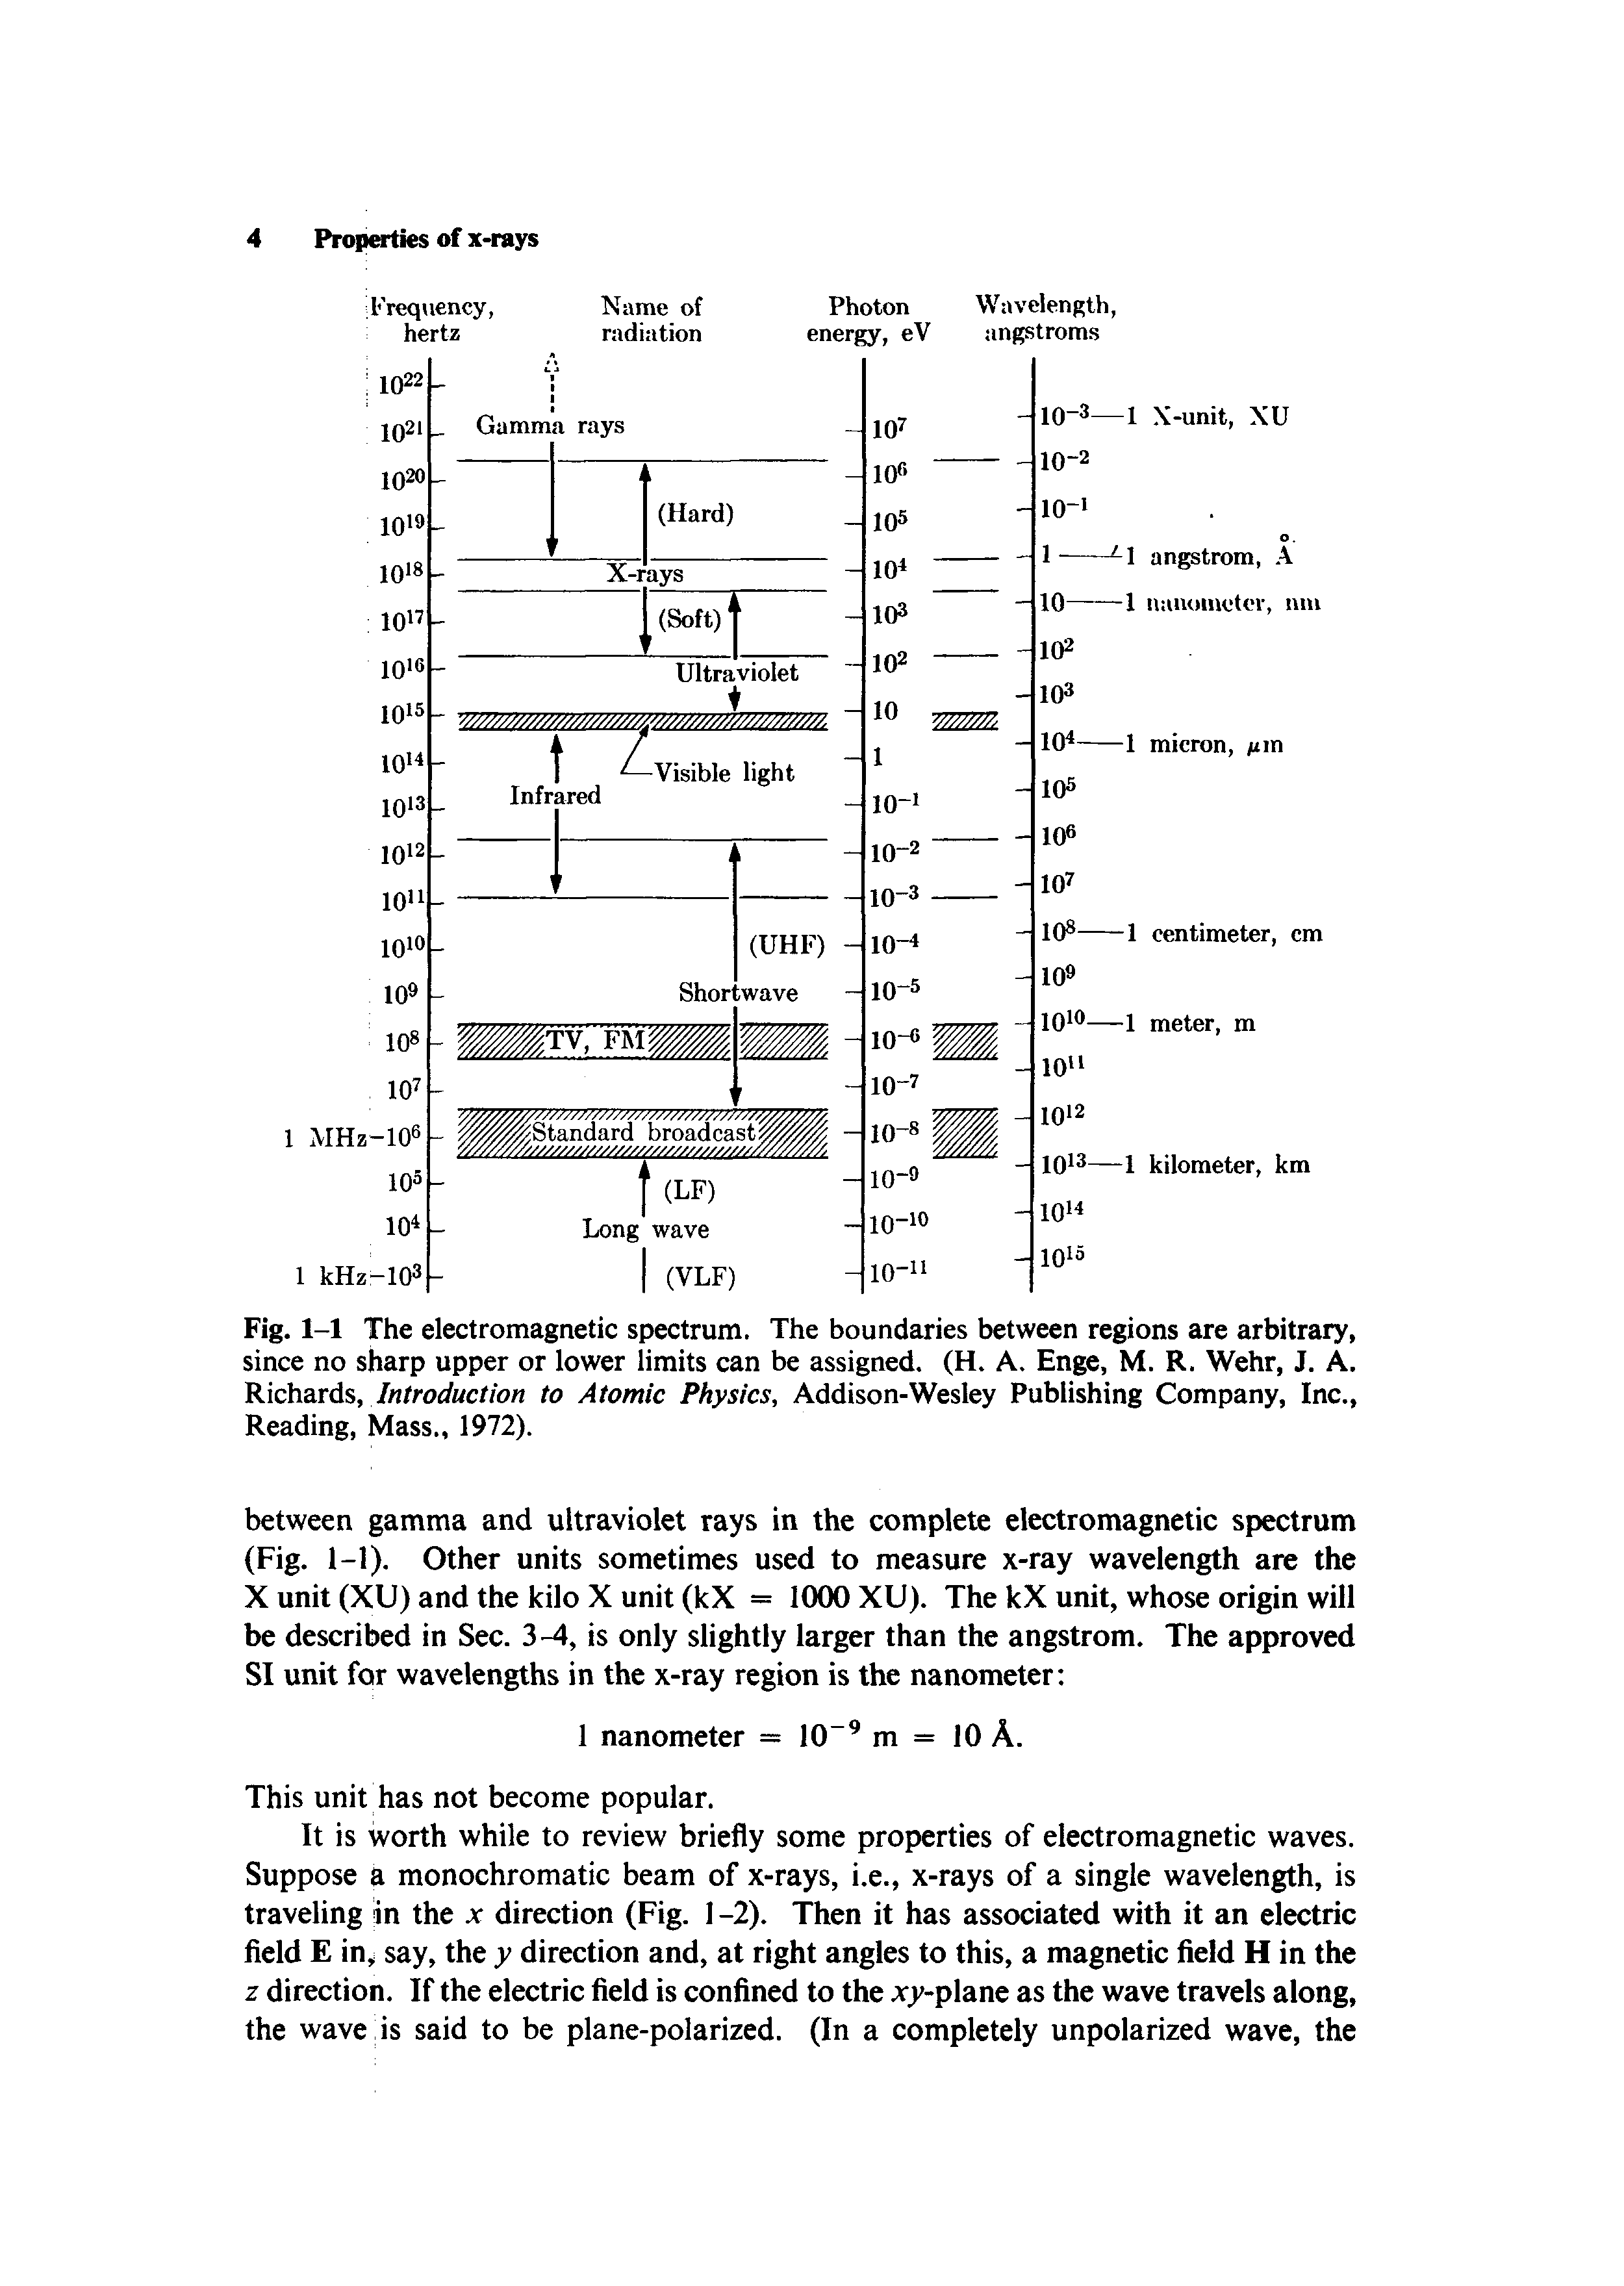 Fig. 1-1 The electromagnetic spectrum. The boundaries between regions are arbitrary, since no sharp upper or lower limits can be assigned. (H. A. Enge, M. R. Wehr, J. A. Richards, / /ro< MC//ort to Atomic Physics, Addison-Wesley Publishing Company, Inc., Reading, Mass., 1972).